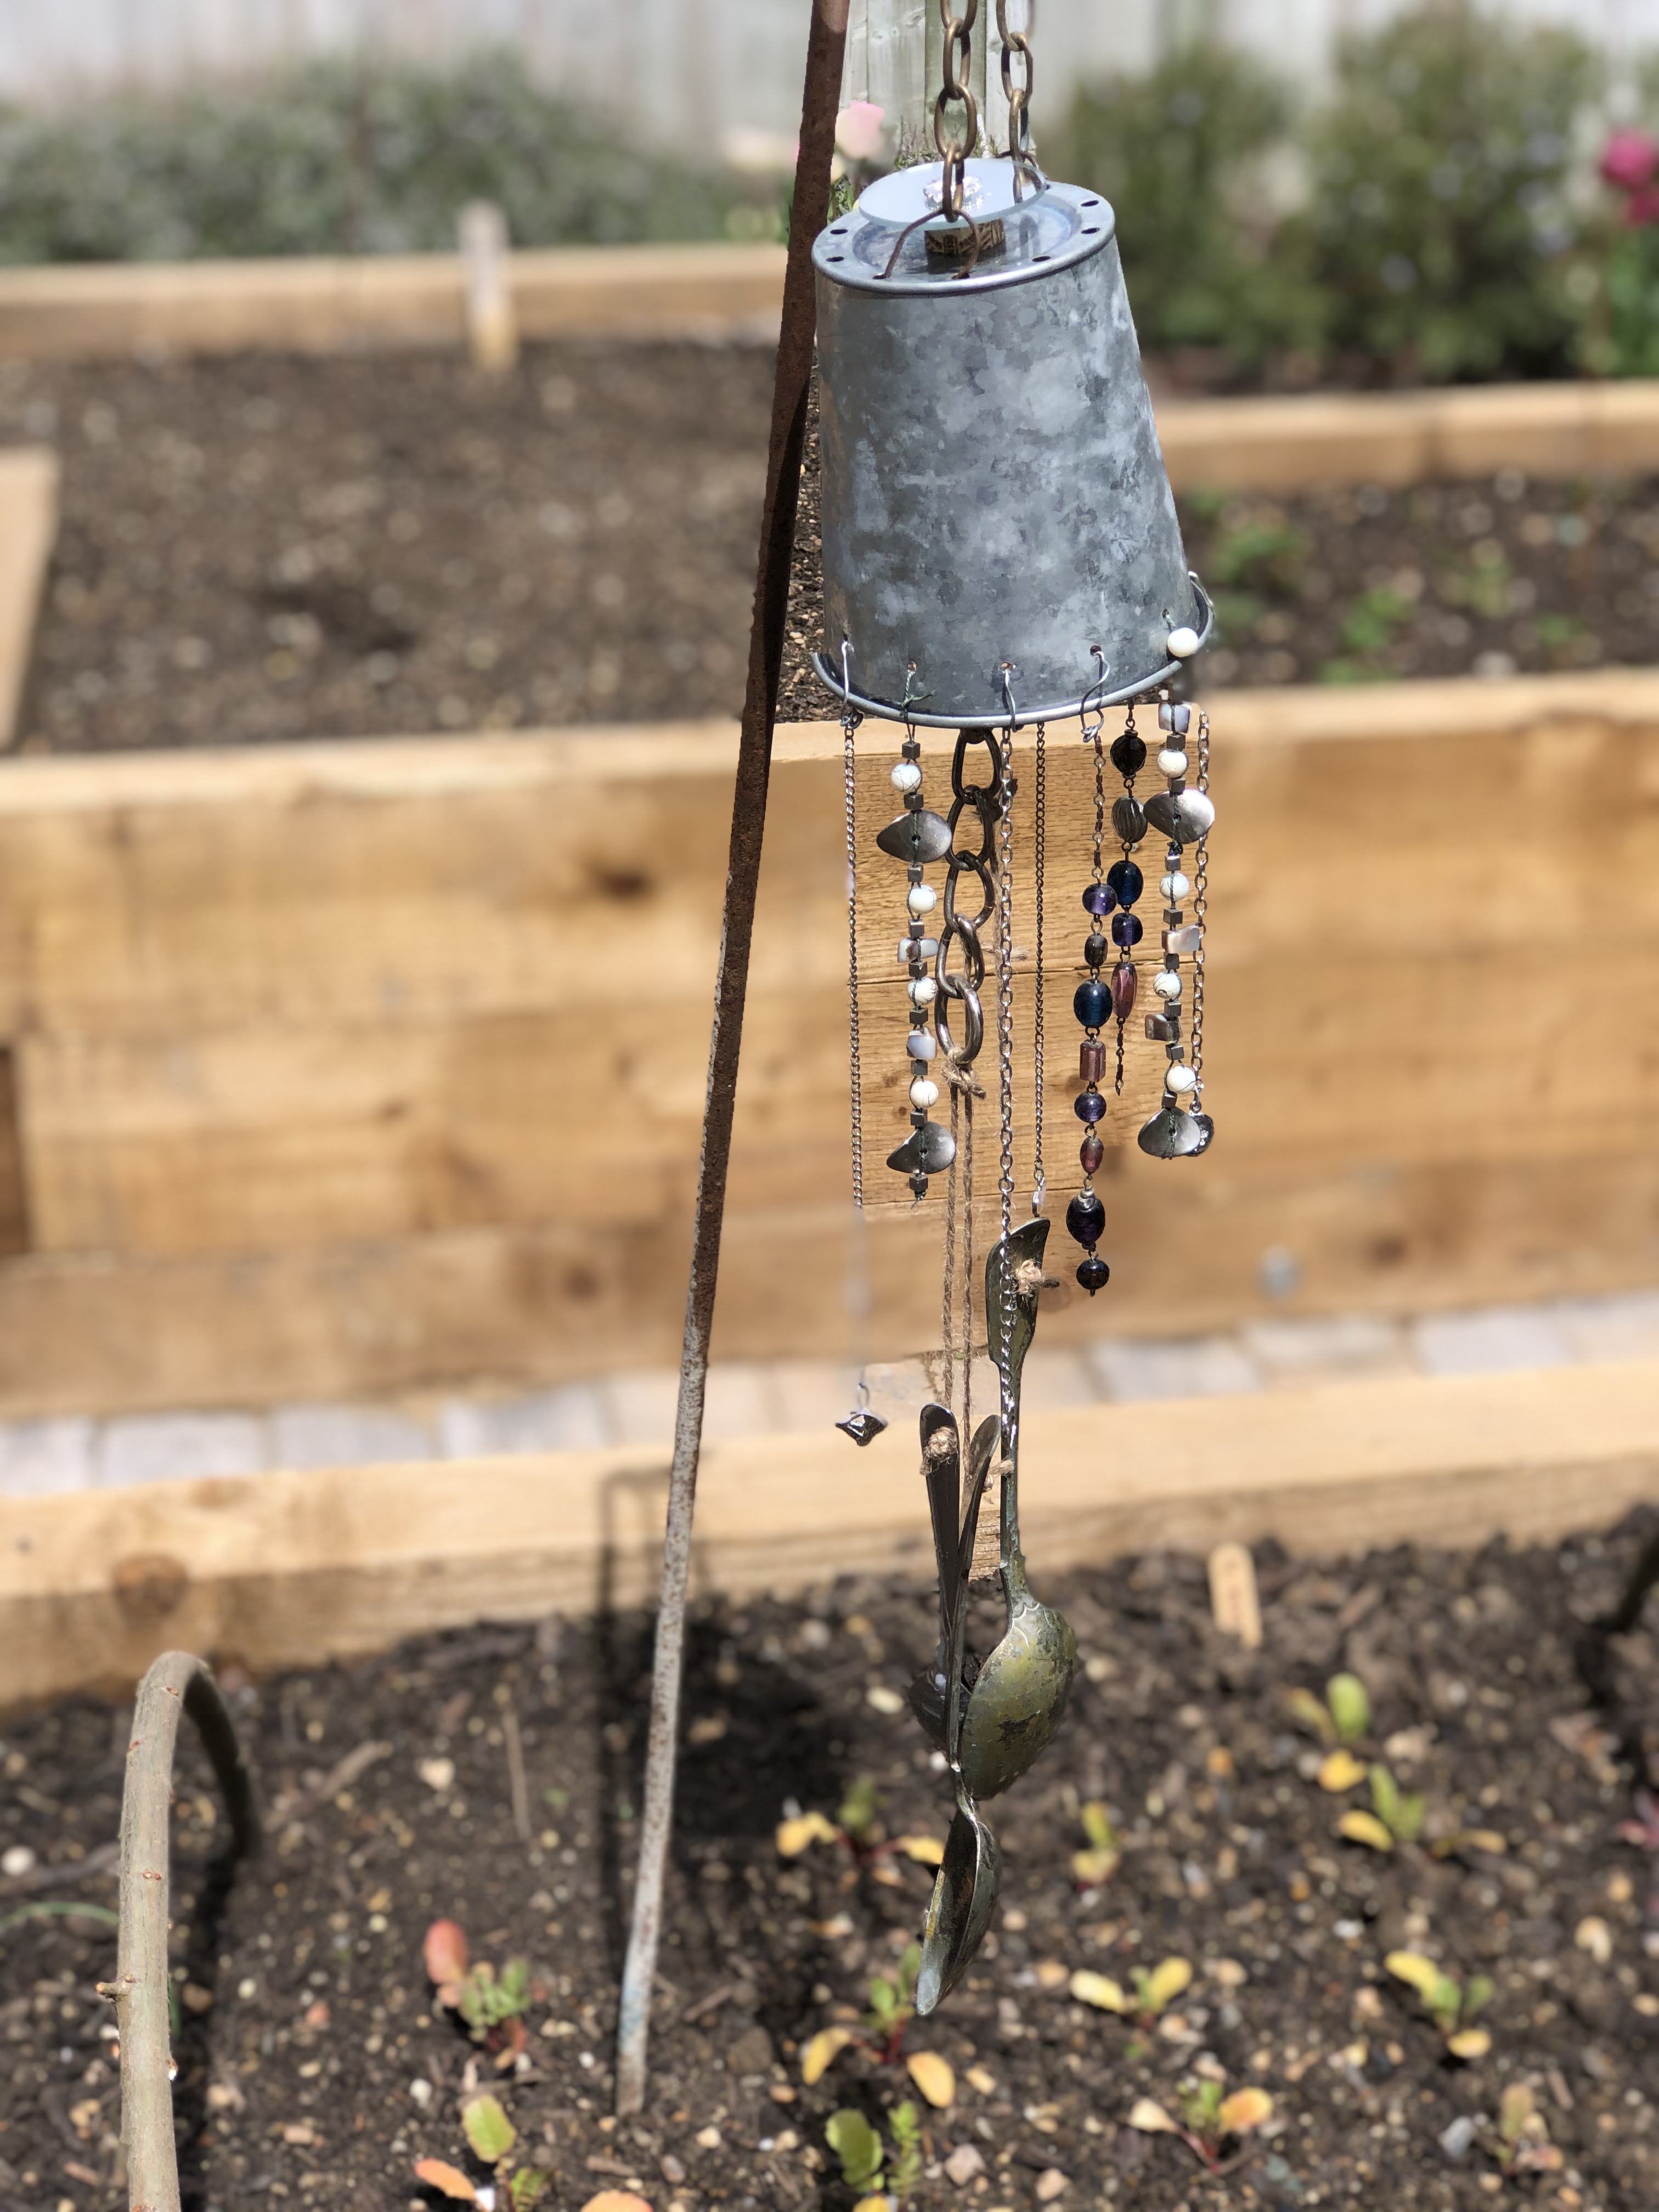 Wind Chimes in situ 5 - How to make a DIY Bird Scarer - or is it a recycled wind chime...